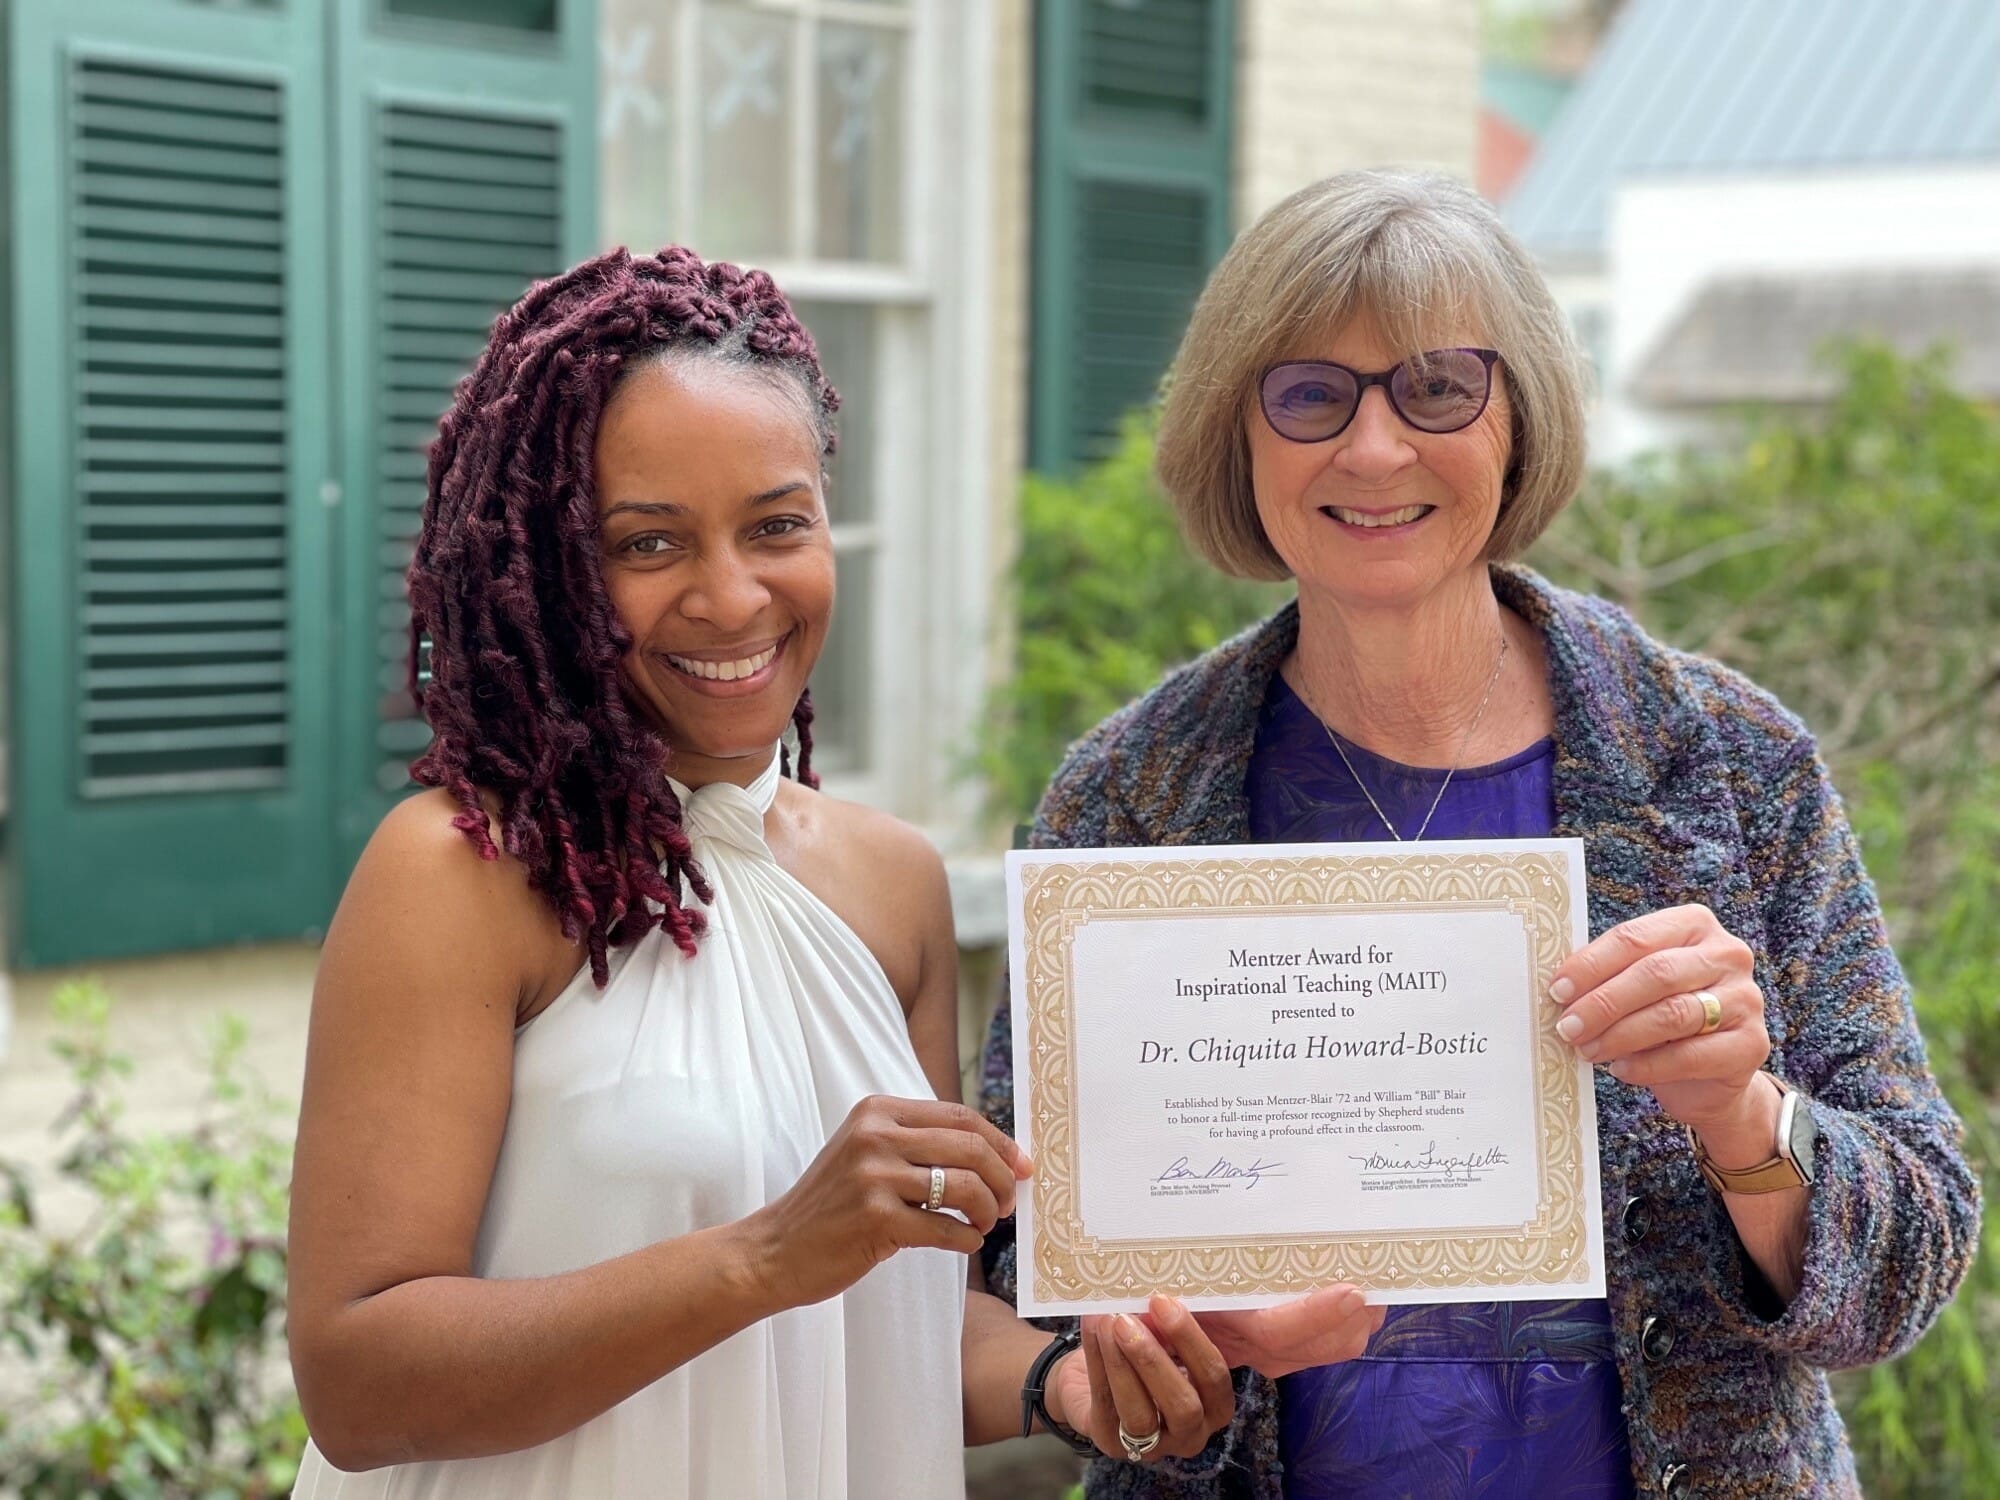 Photo of Dr. Chiquita Howard-Bostic and Sue Mentzer Blair smiling, looking at camera, holding certificate.